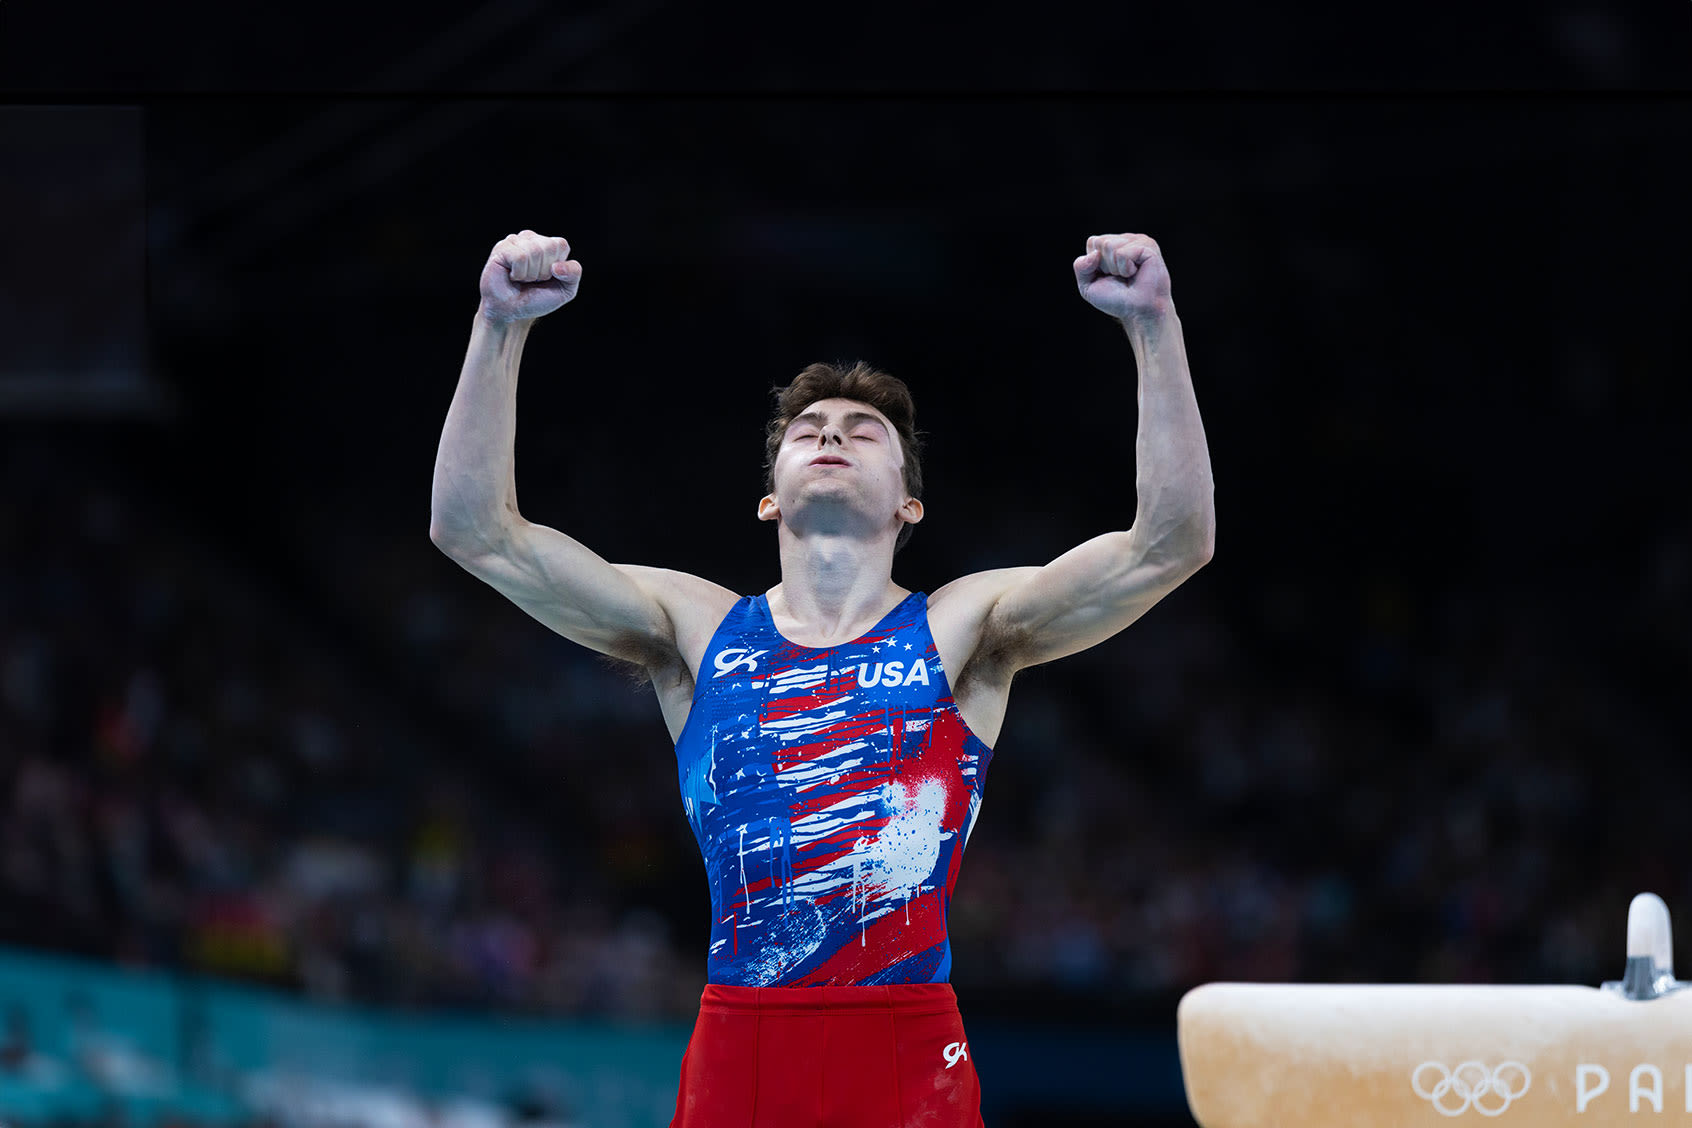 6 things to know about Stephen Nedoroscik, the Clark Kent of American pommel horse